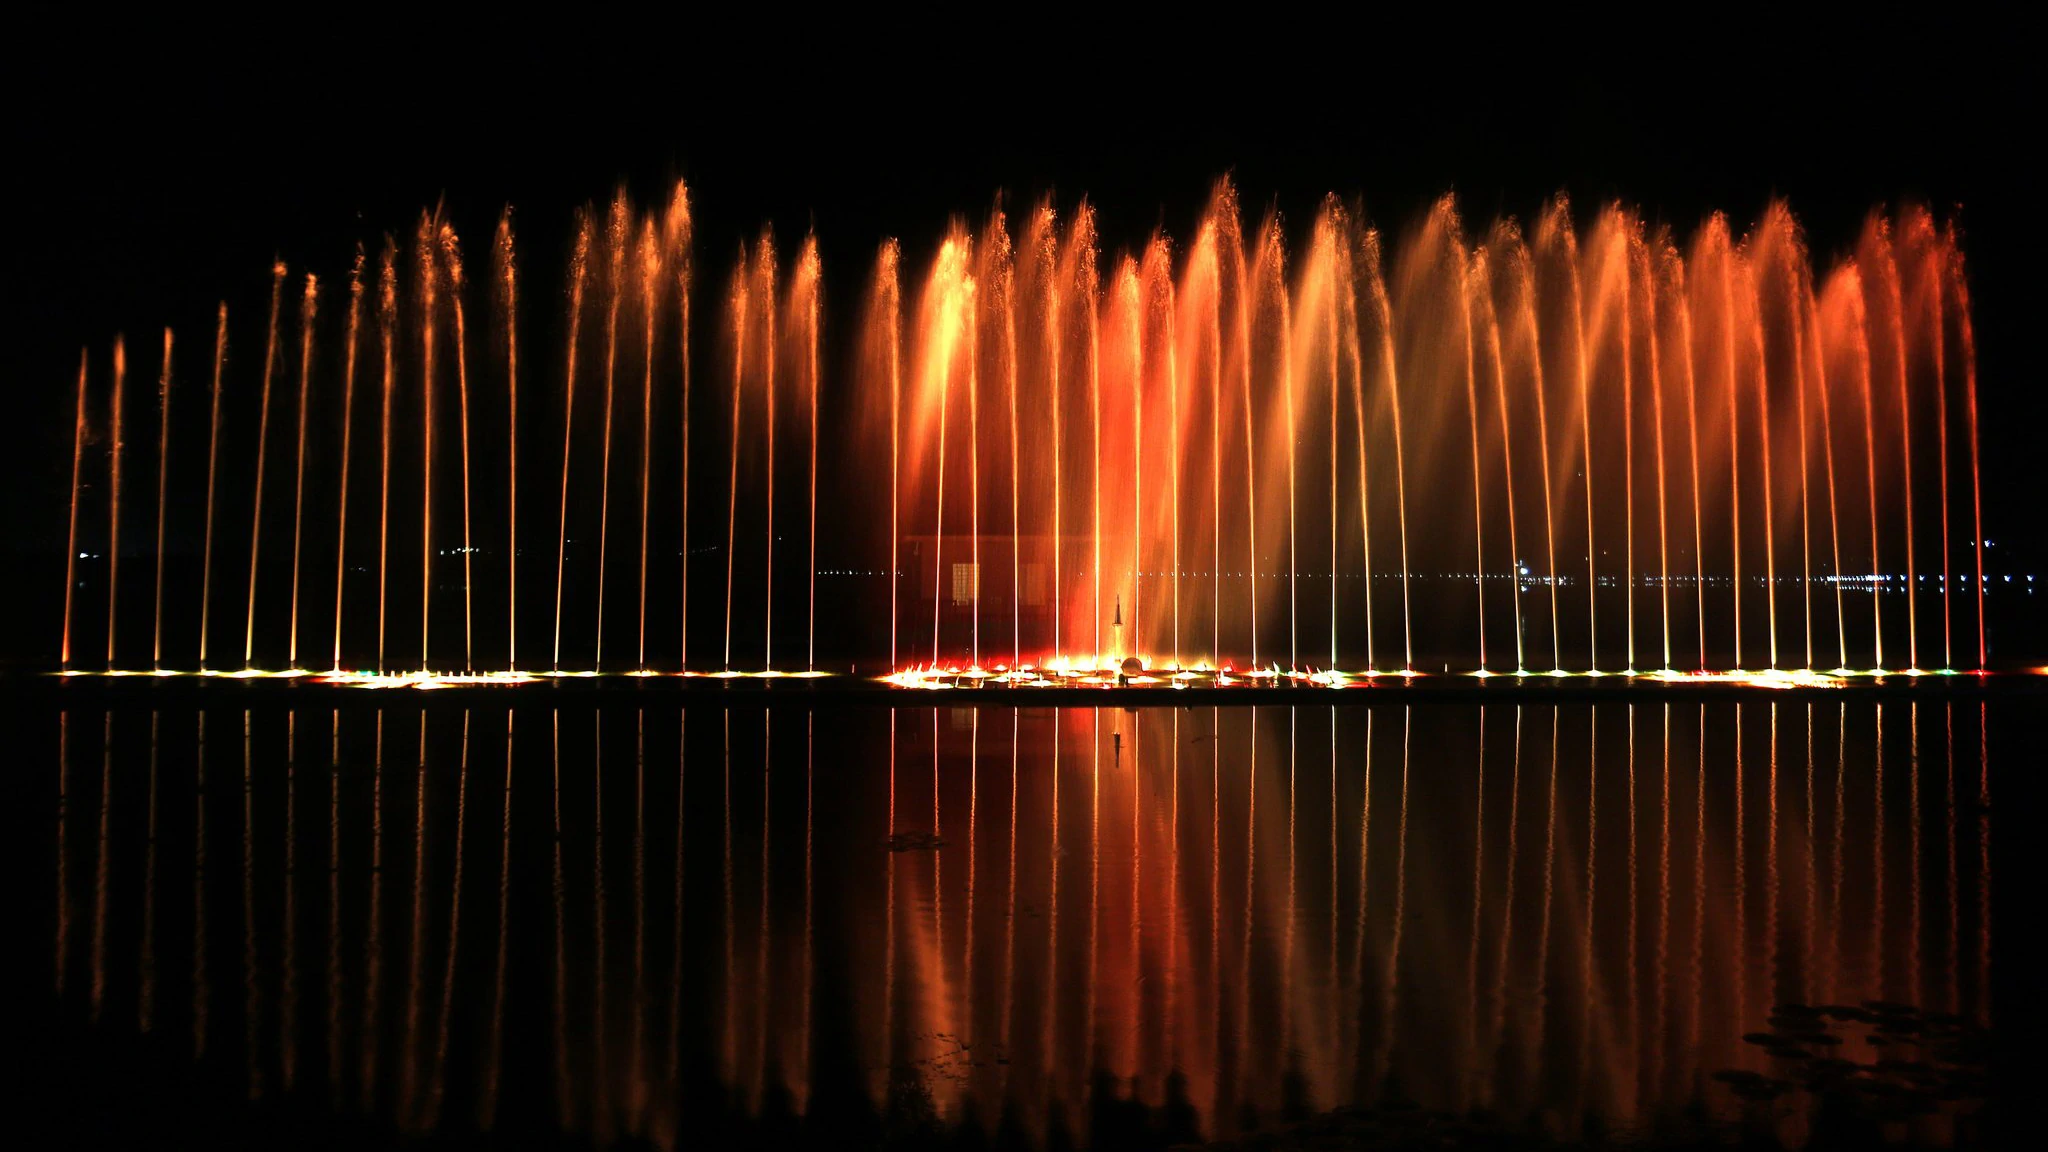 2.The water fountain light show at night